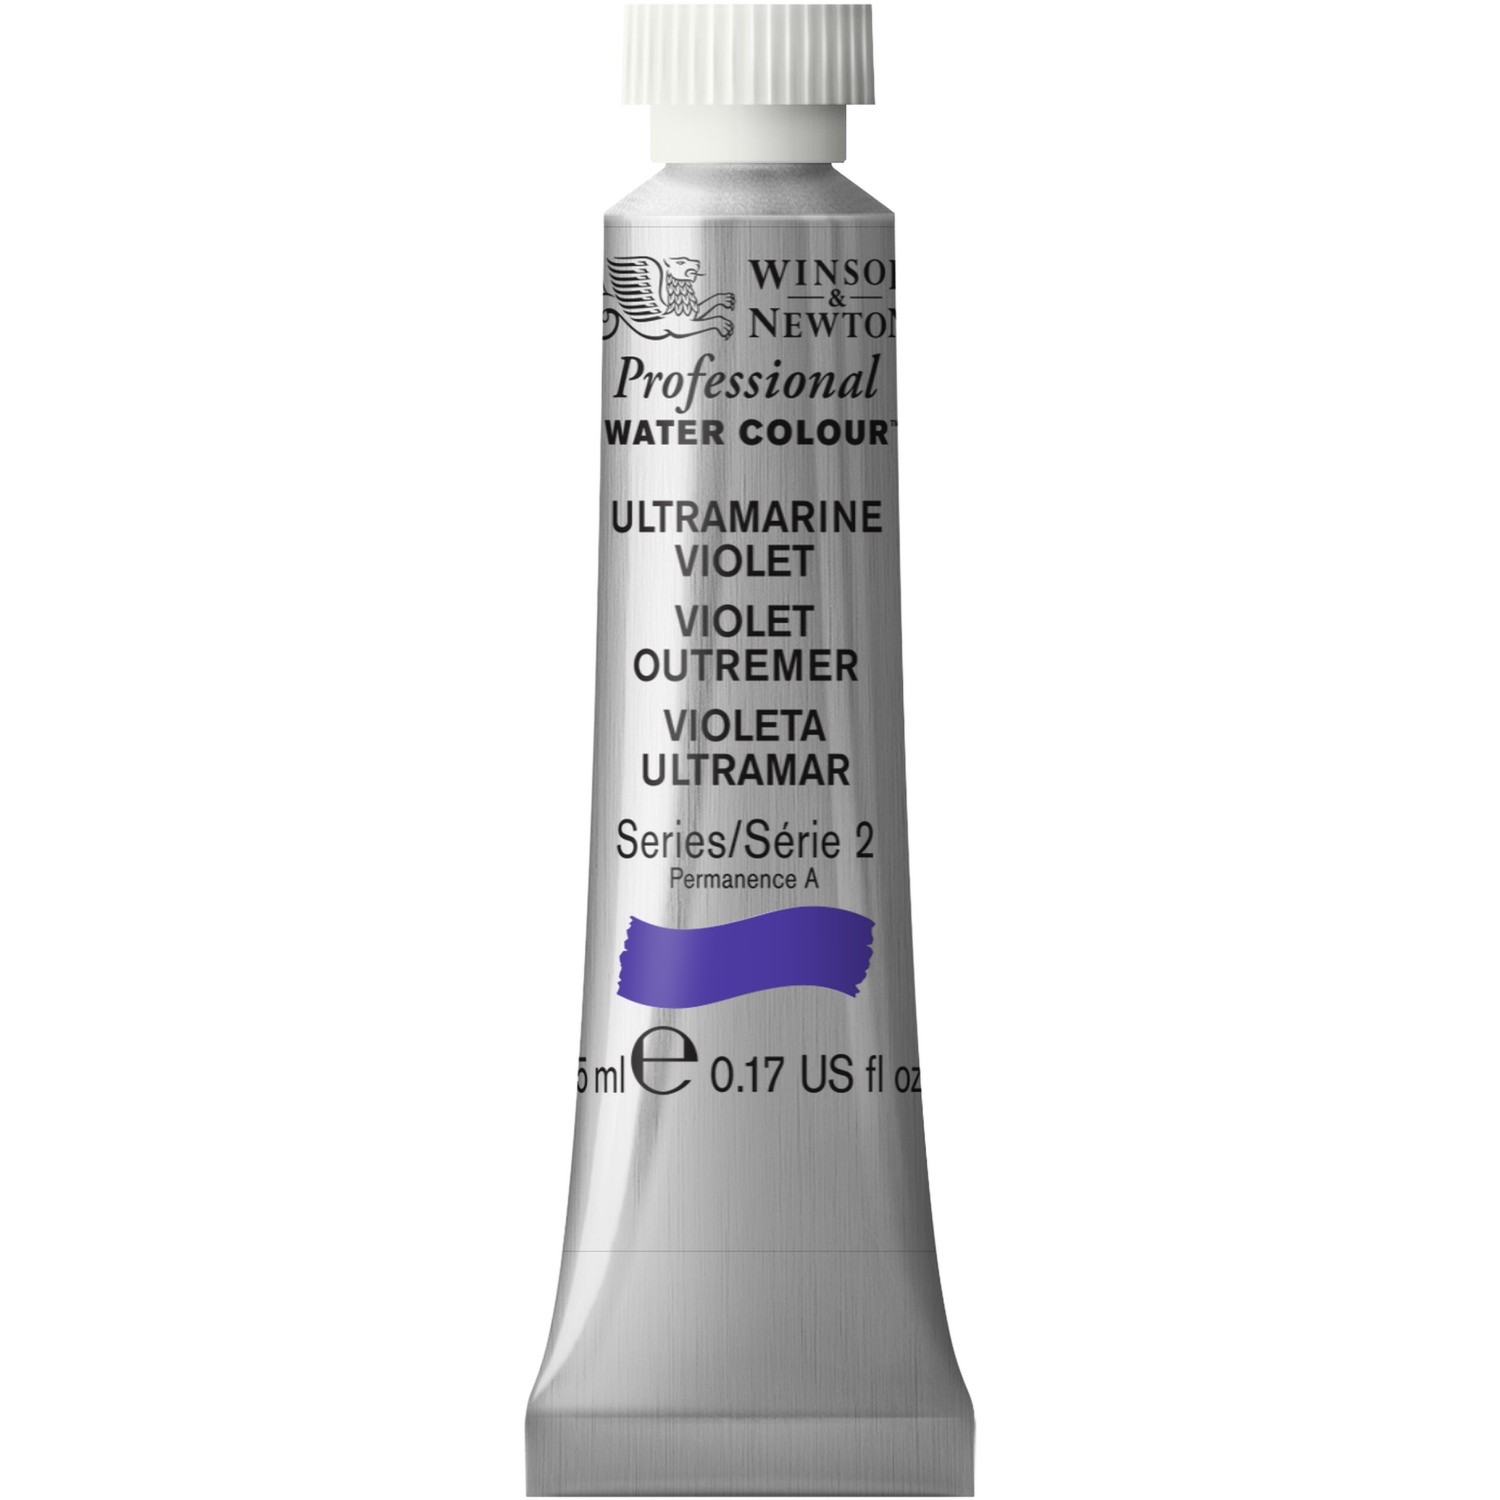 Winsor and Newton 5ml Professional Watercolour Paint - Ultramarine Violet Image 1